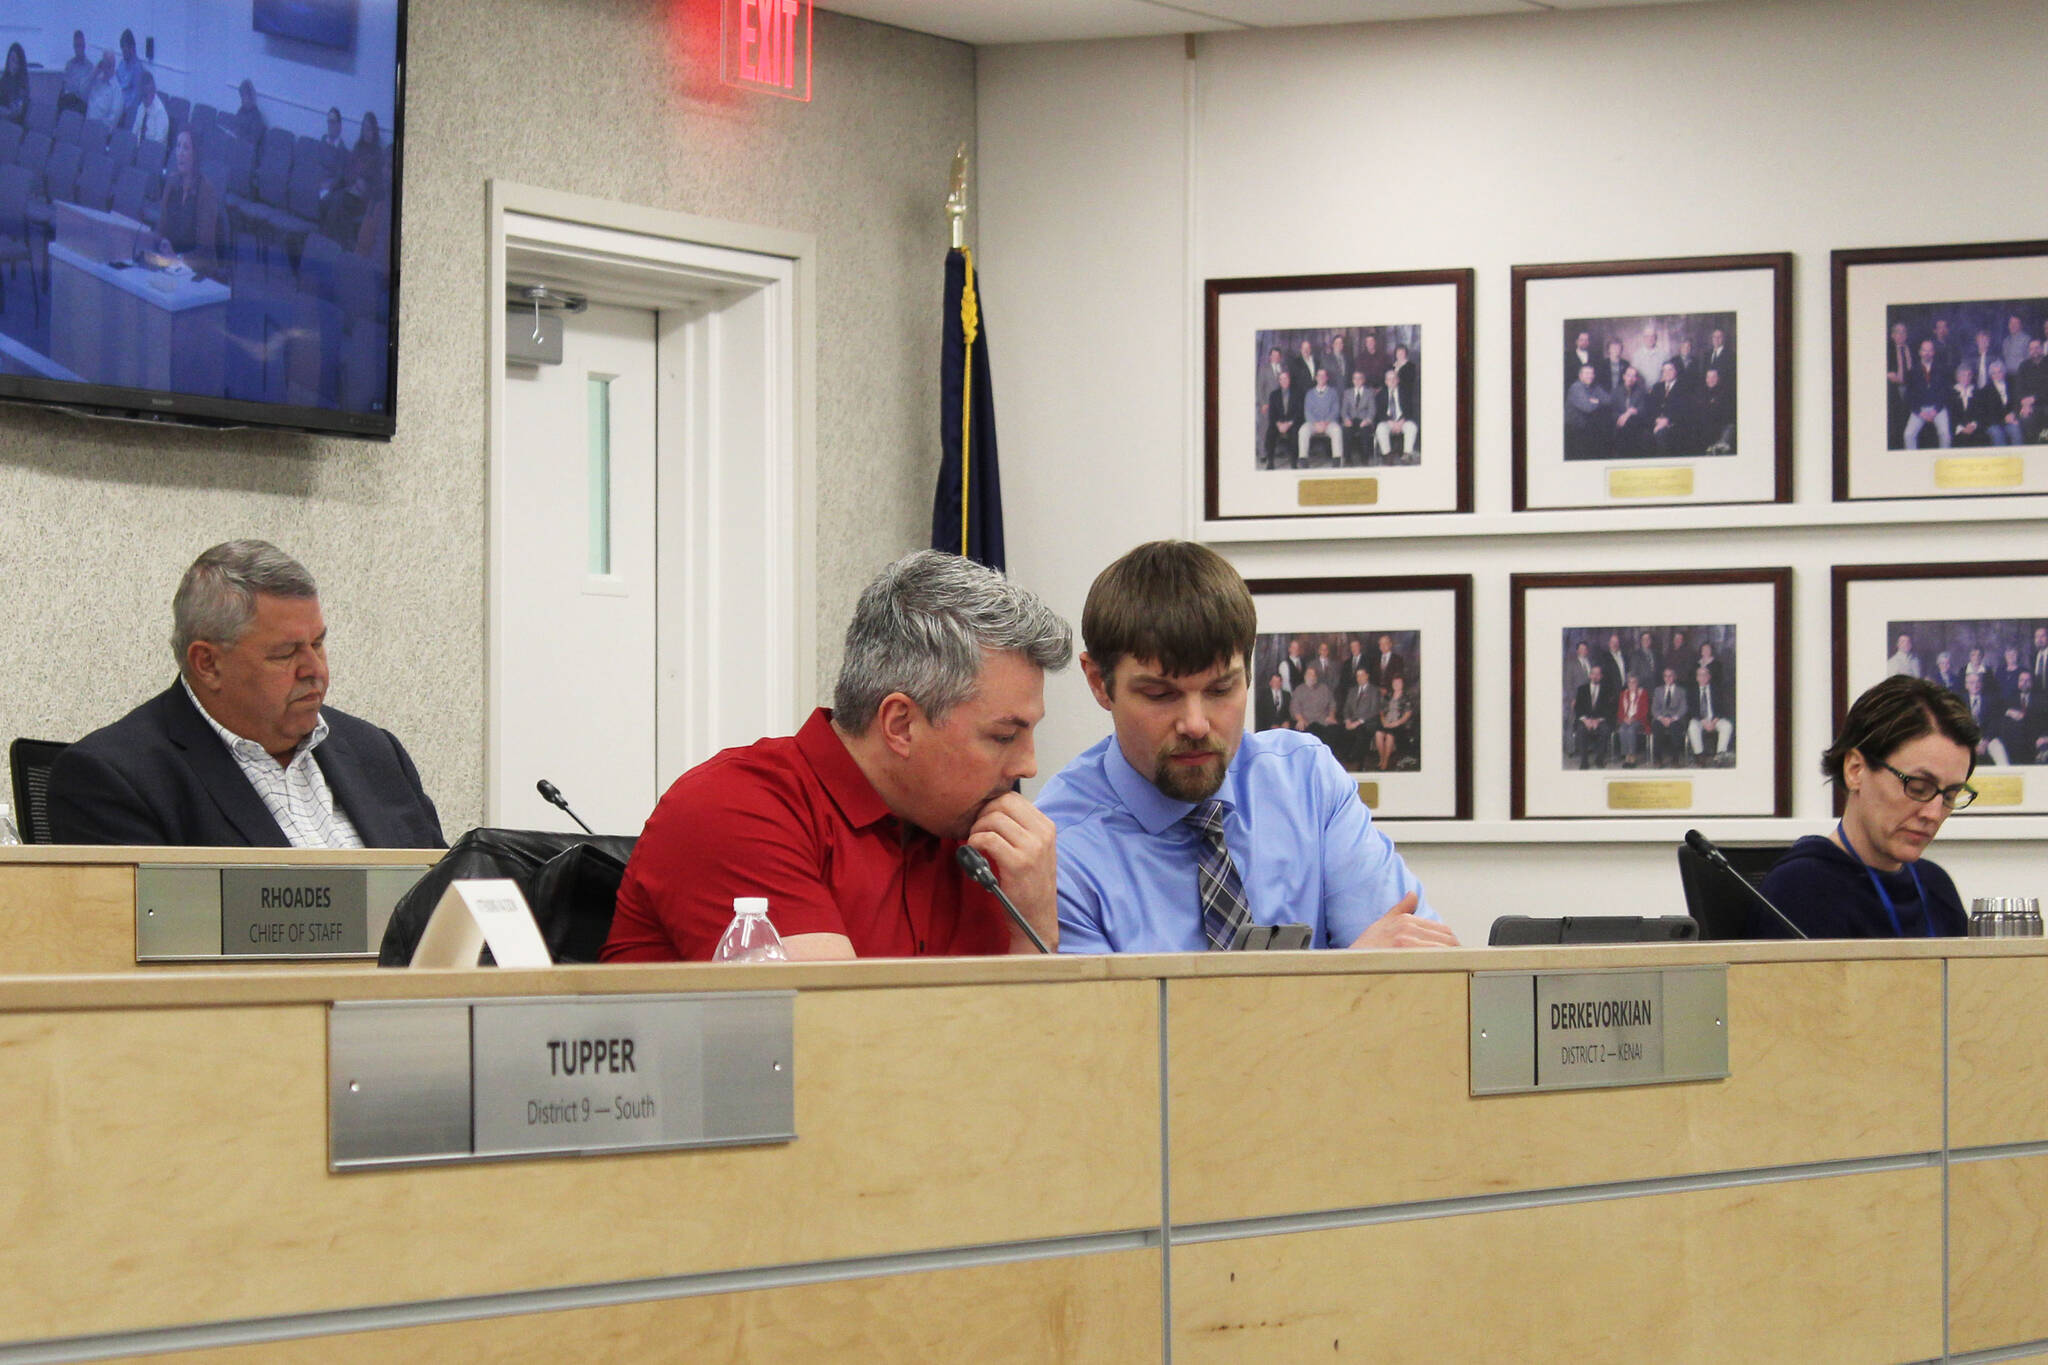 Assembly members Richard Derkevorkian (left) and Jesse Bjorkman consult during a meeting of the Kenai Peninsula Borough Assembly on Tuesday, Dec. 7, 2021 in Soldotna, Alaska. (Ashlyn O’Hara)